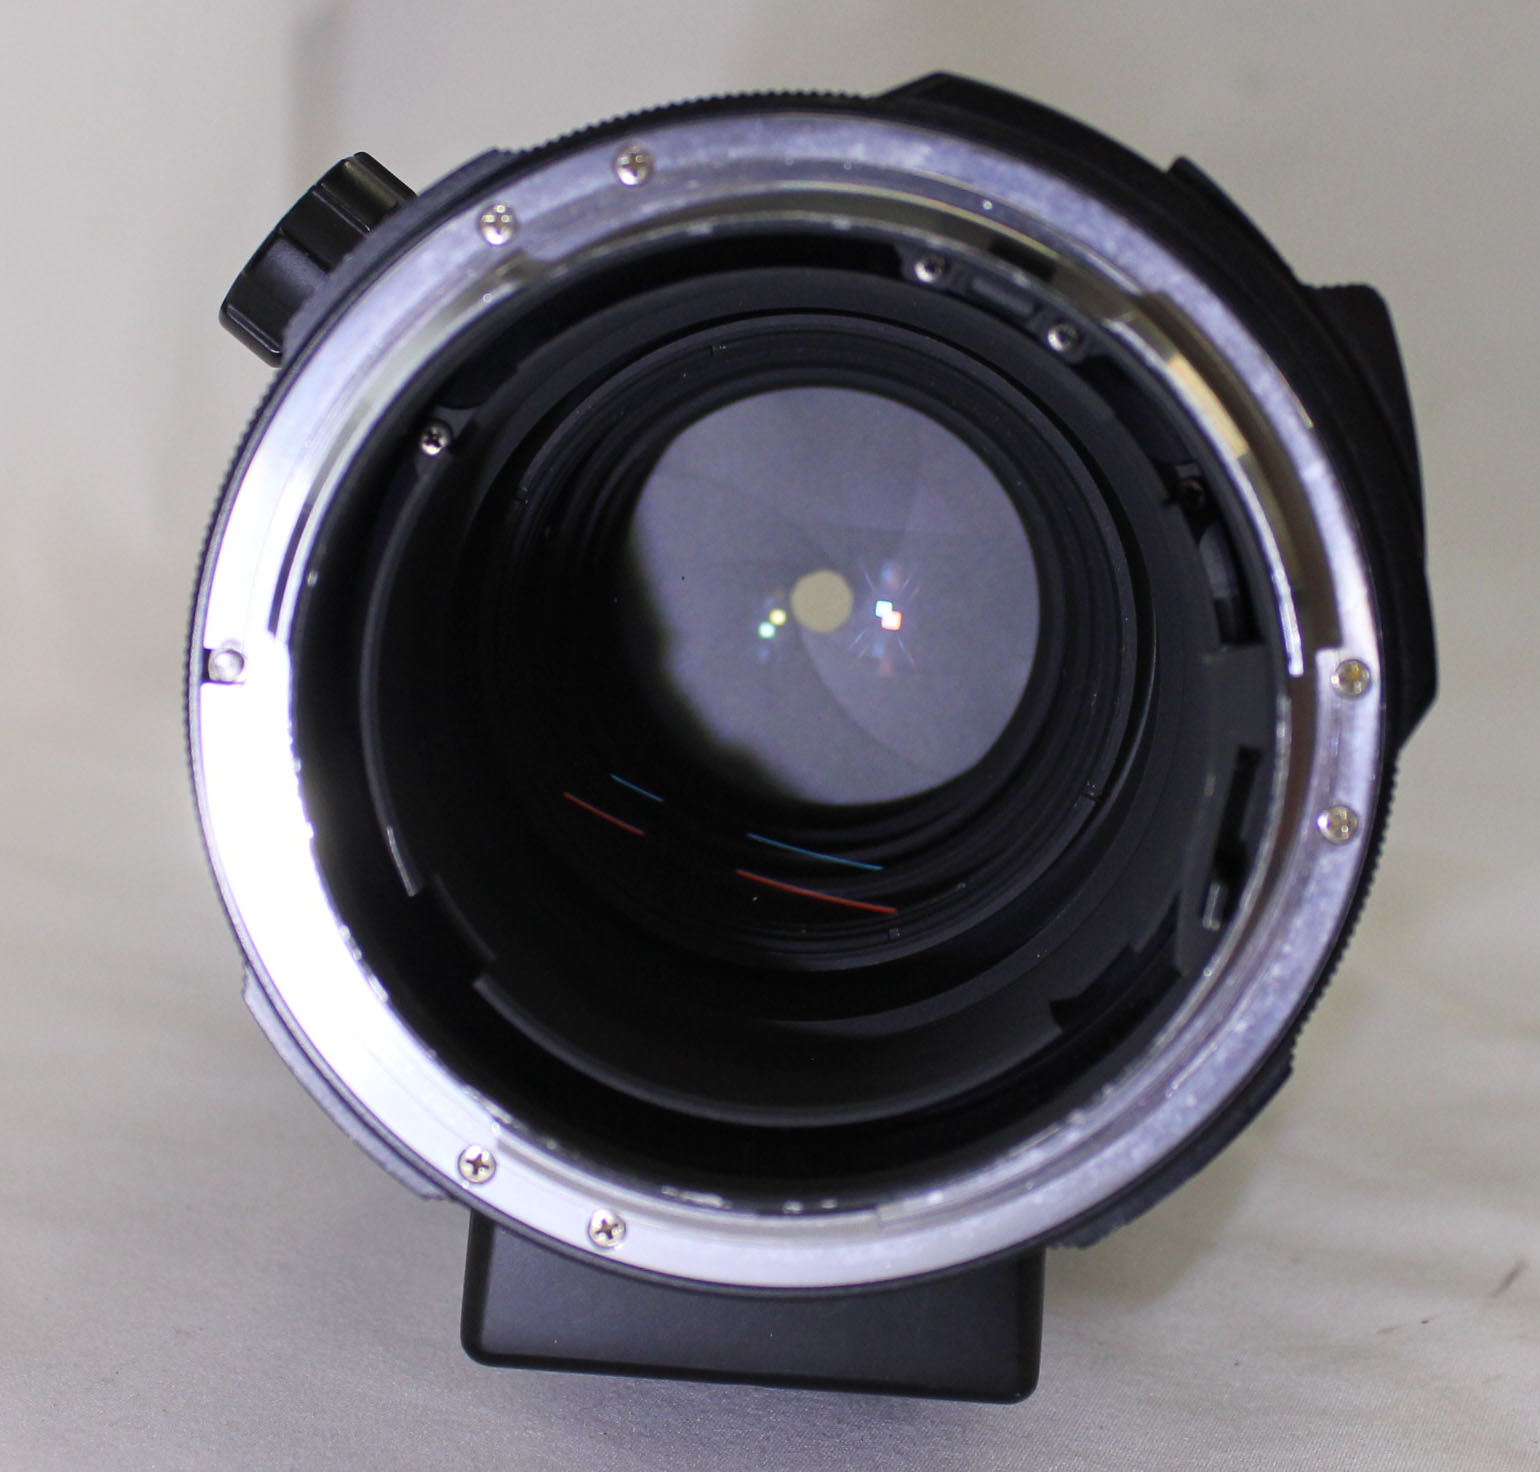 SMC Pentax-M* 67 300mm F/4 ED IF Green Star Lens for 6x7 67 II from Japan Photo 6